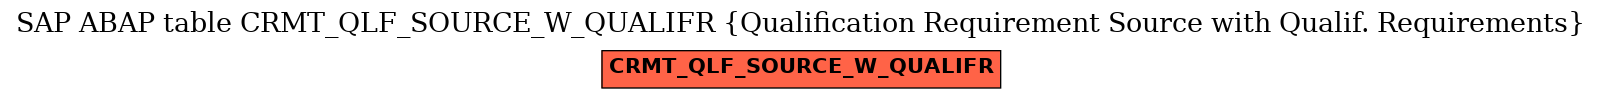 E-R Diagram for table CRMT_QLF_SOURCE_W_QUALIFR (Qualification Requirement Source with Qualif. Requirements)